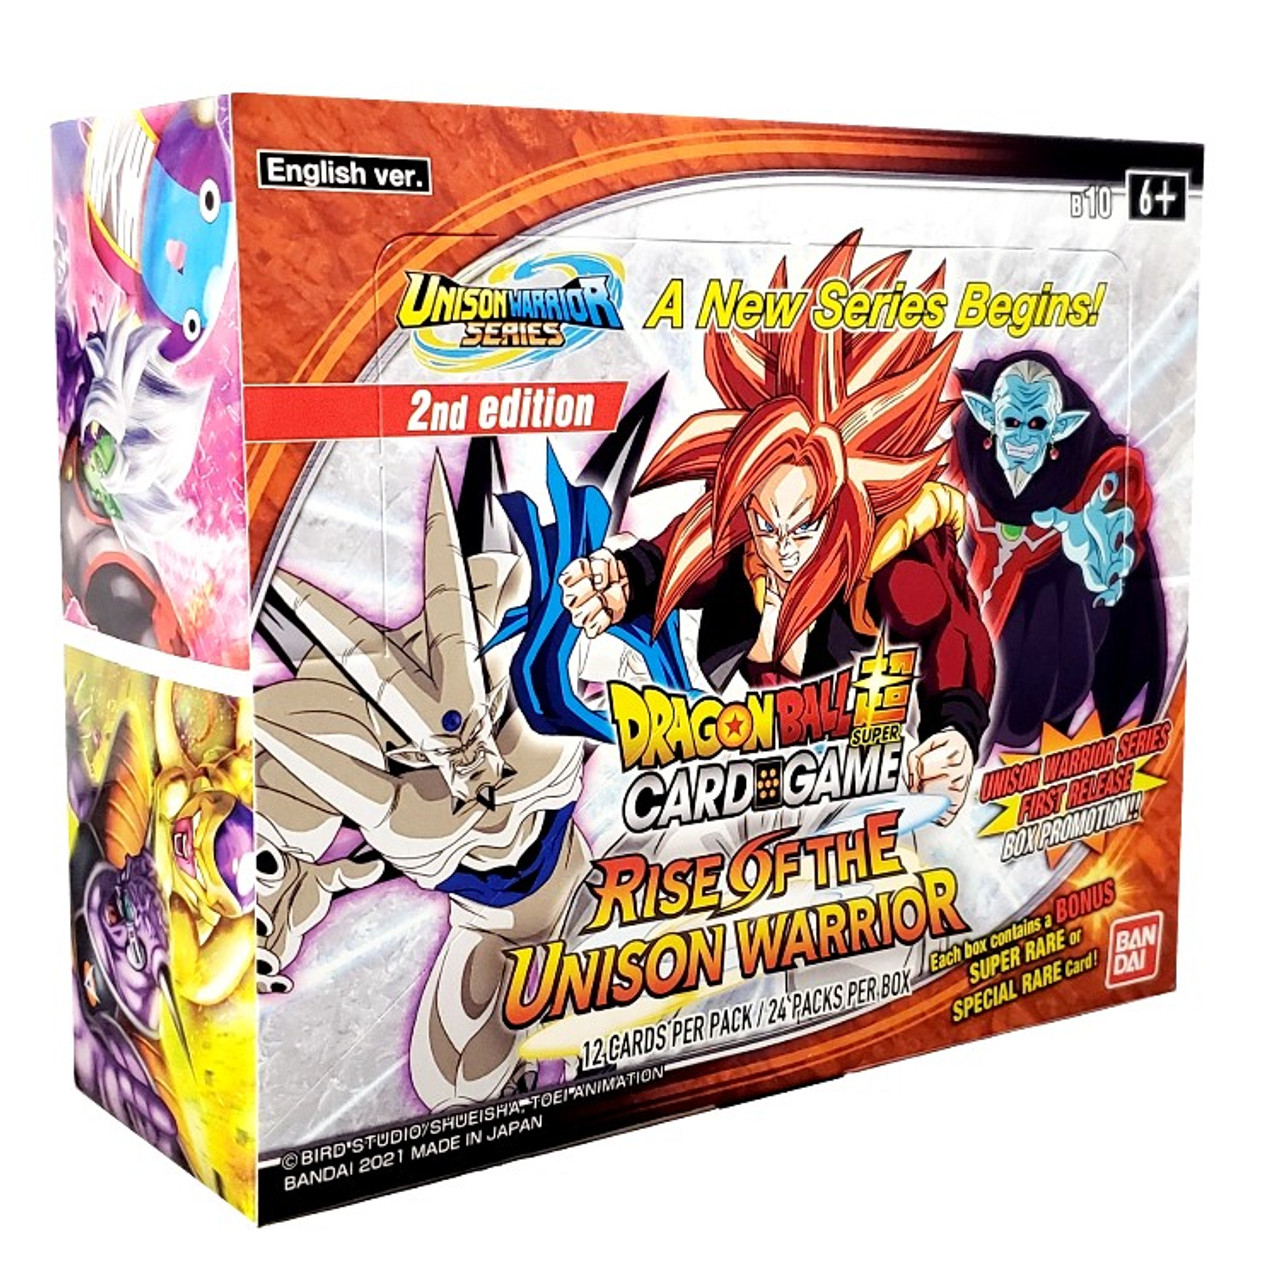 DRAGON BALL Z HEROES AND VILLAINS (PANINI) 12-CARD BOOSTER PACK - Dragon  Ball Series  Trading Card Mint - Yugioh, Cardfight Vanguard, Trading Cards  Cheap, Fast, Mint For Over 25 Years